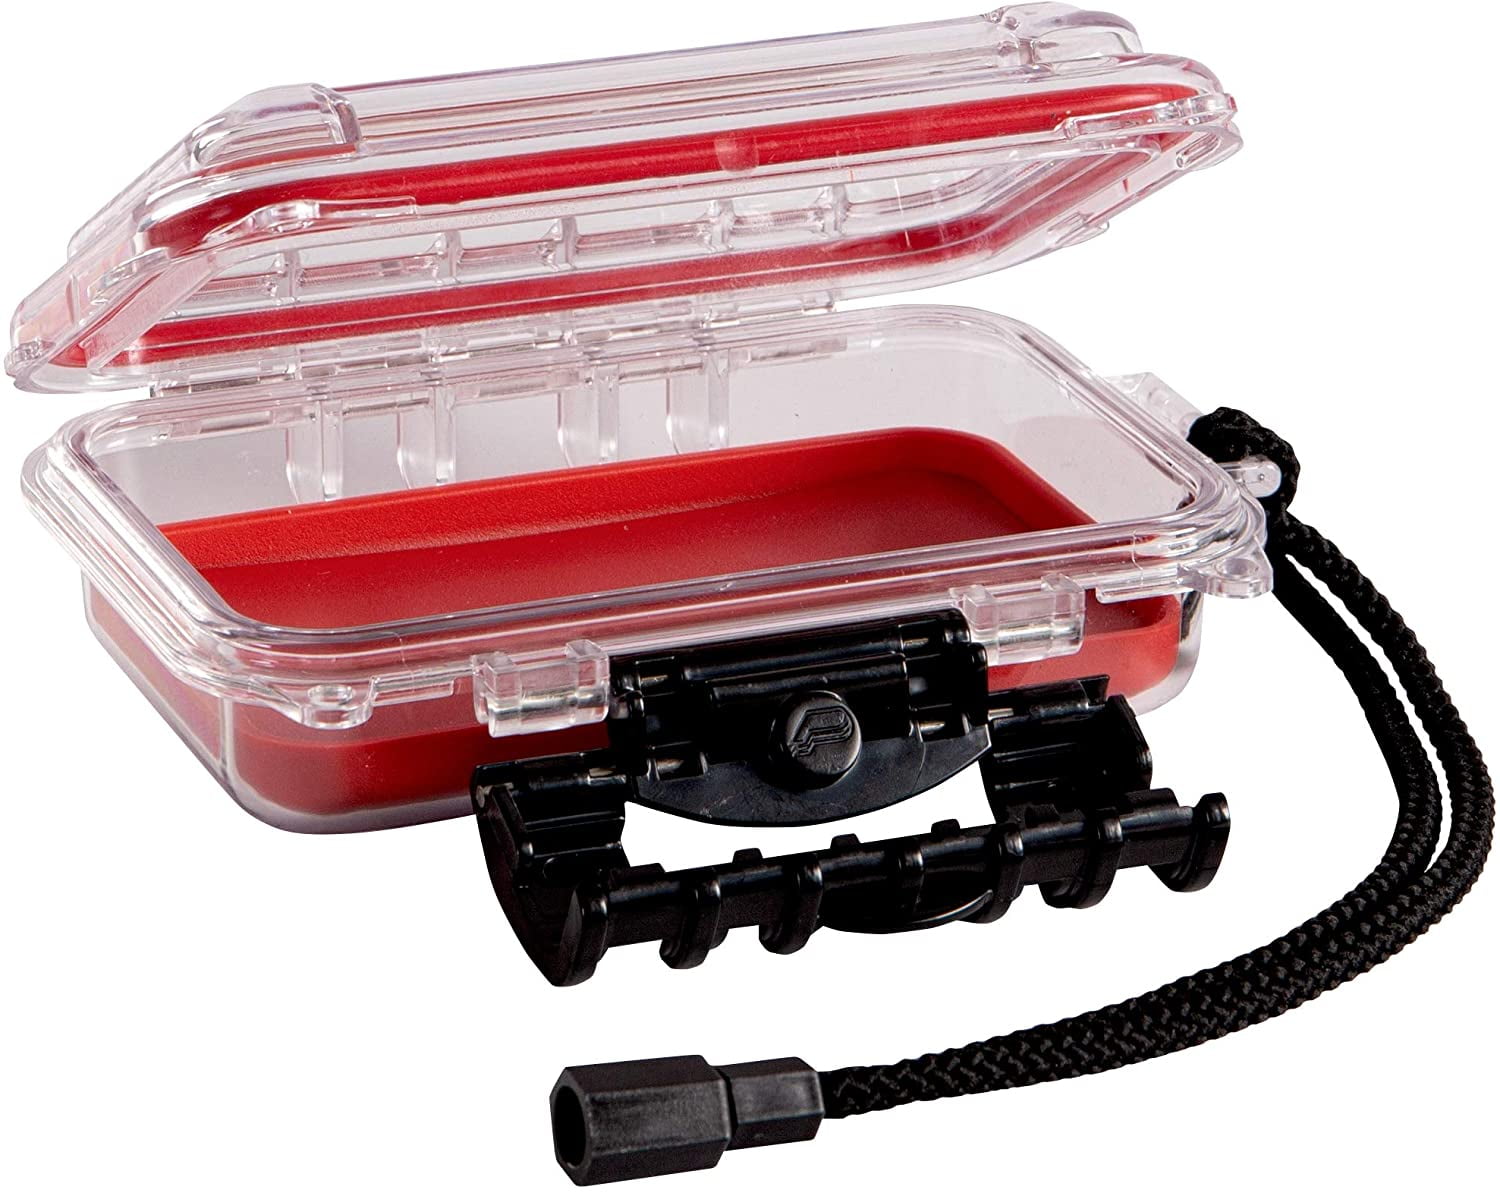 Plano XS GUIDE PC 3449 SIZE FIELD BOX - RED - Black Sheep Sporting Goods